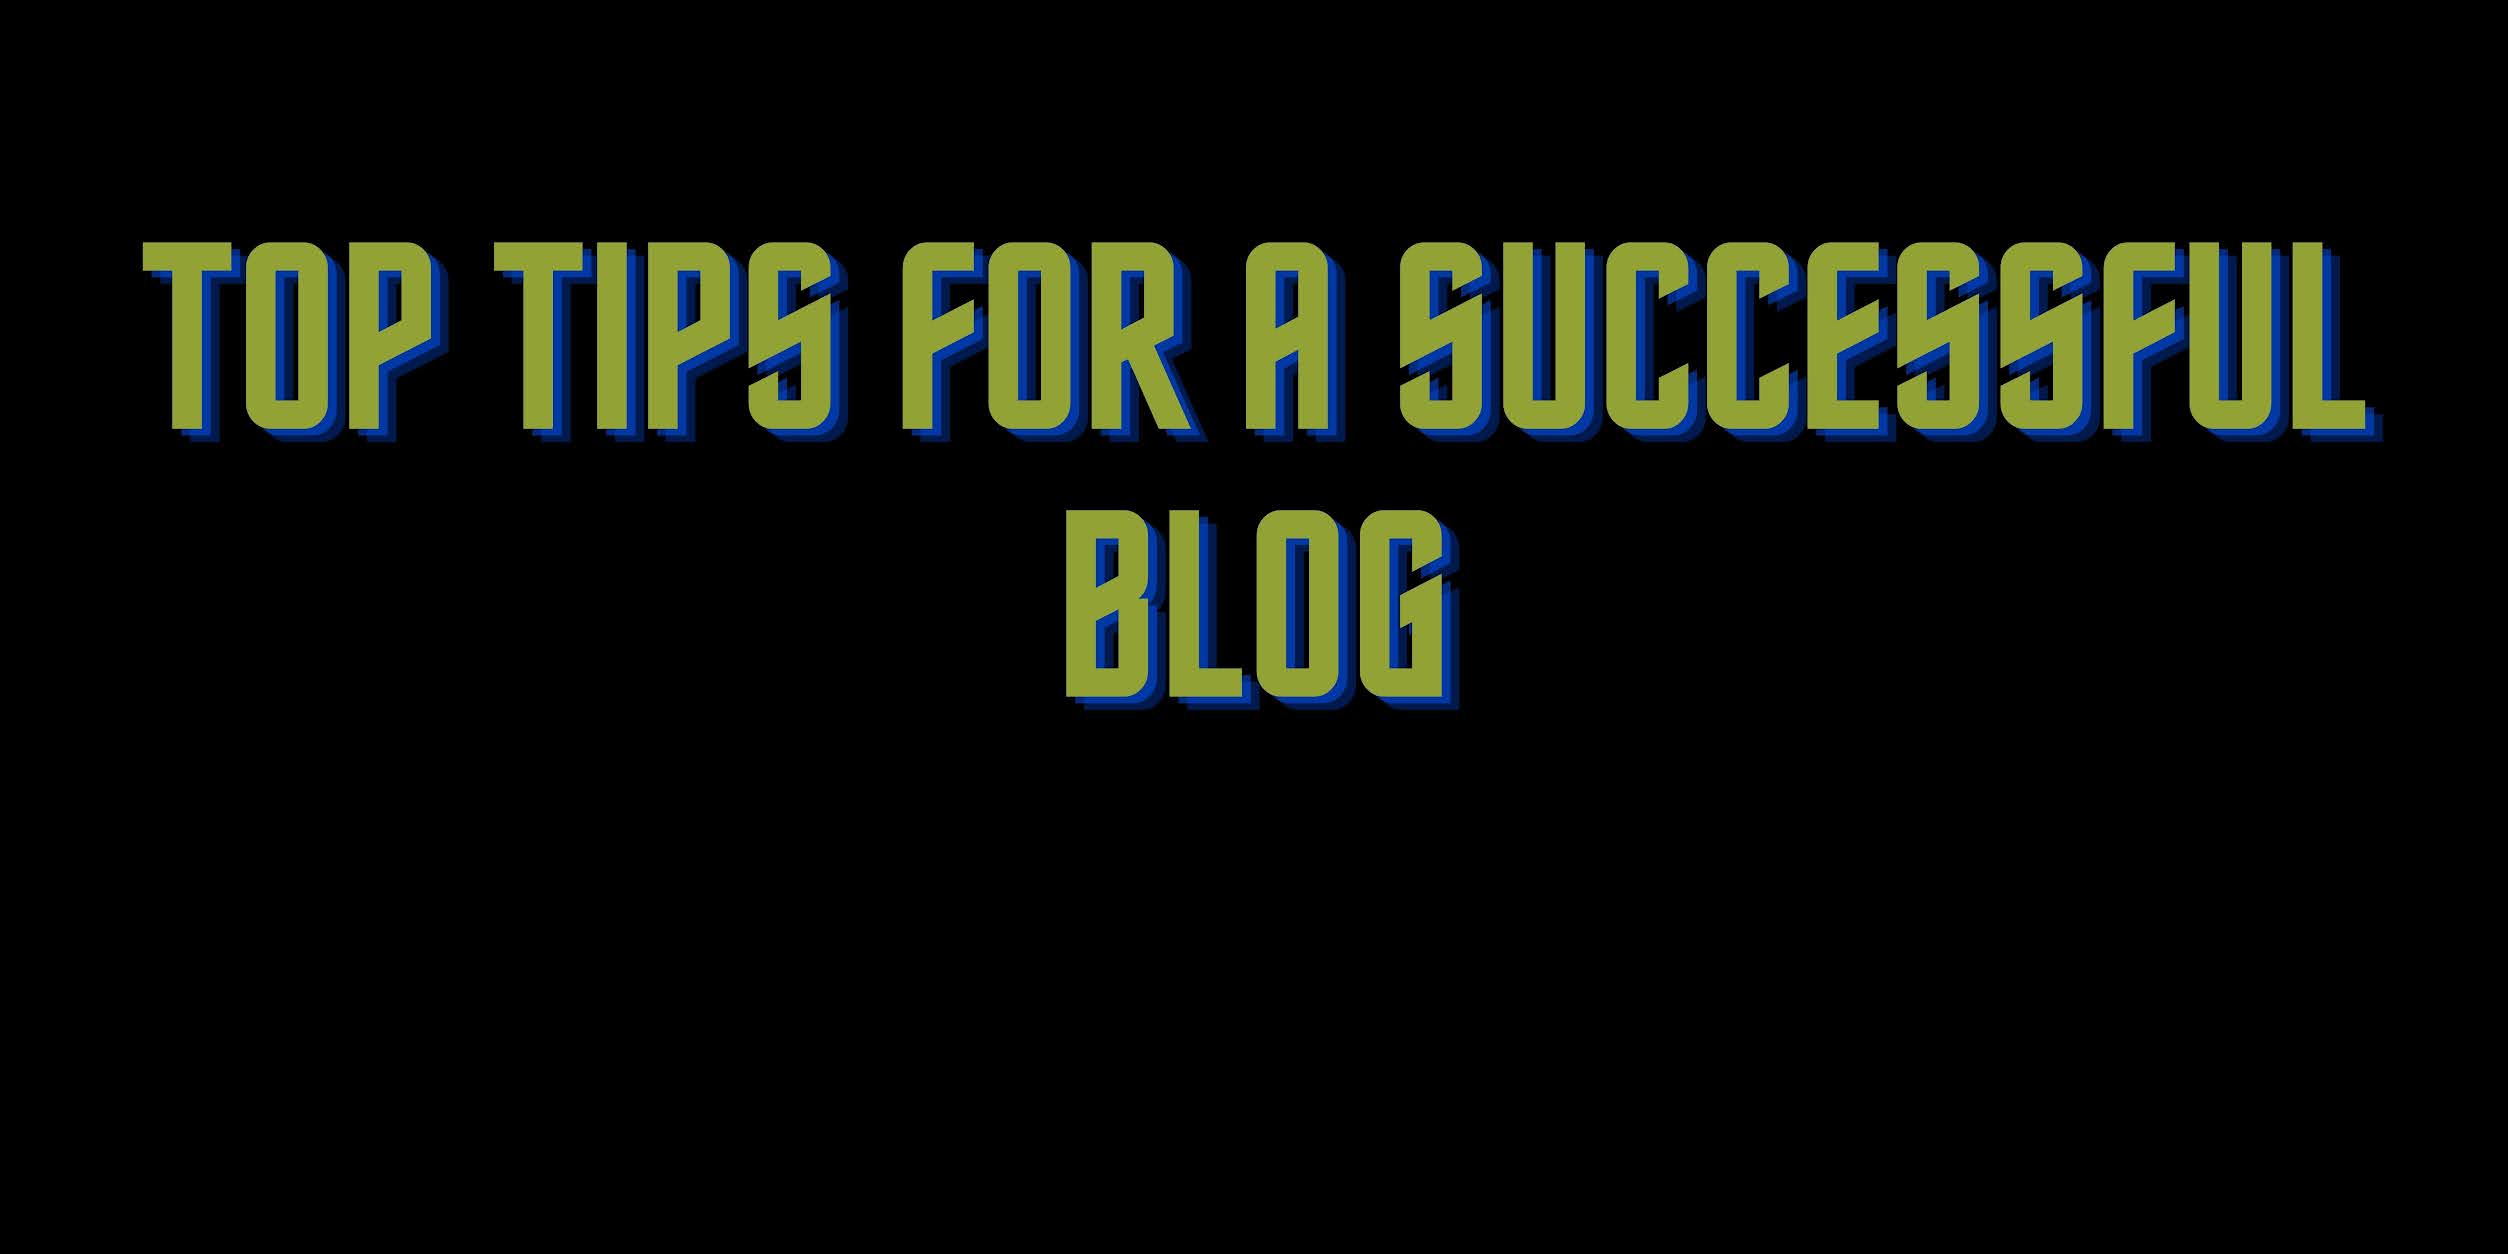 Top Tips For A Successful Blog